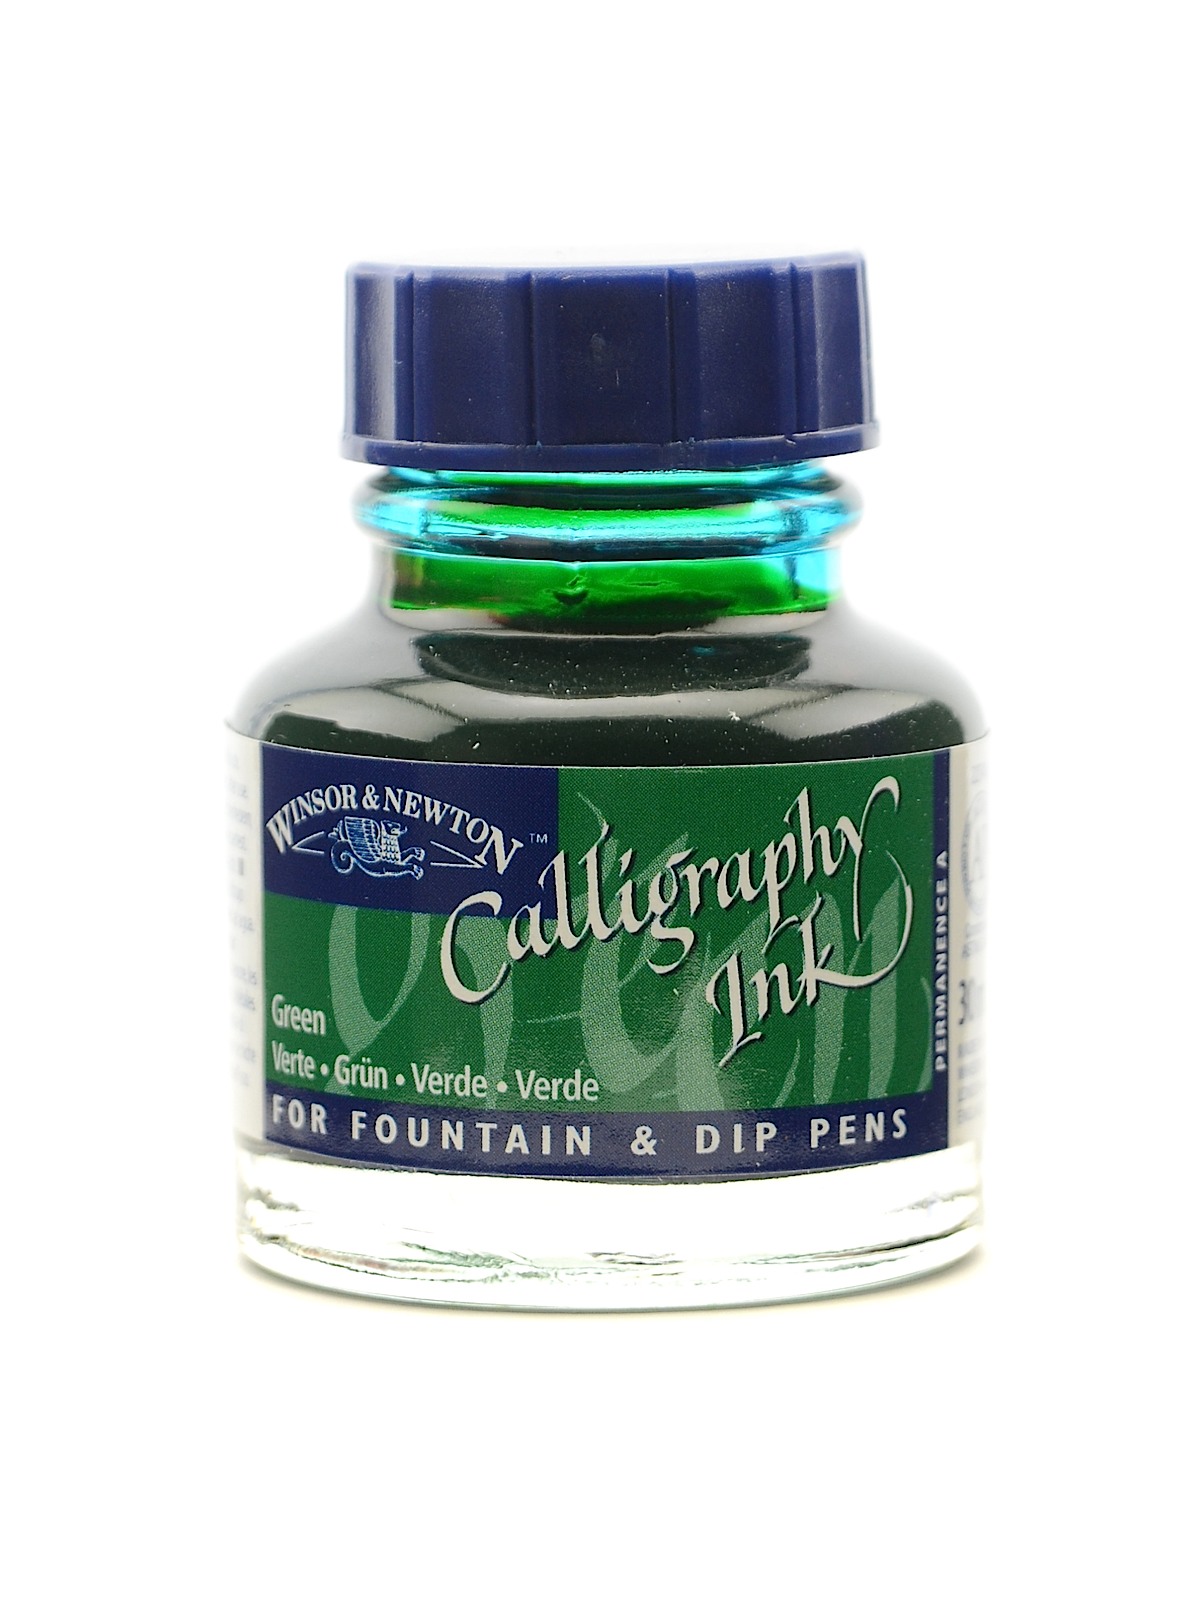 Winsor and Newton Calligraphy Ink matte black 1 oz. [Pack of 3